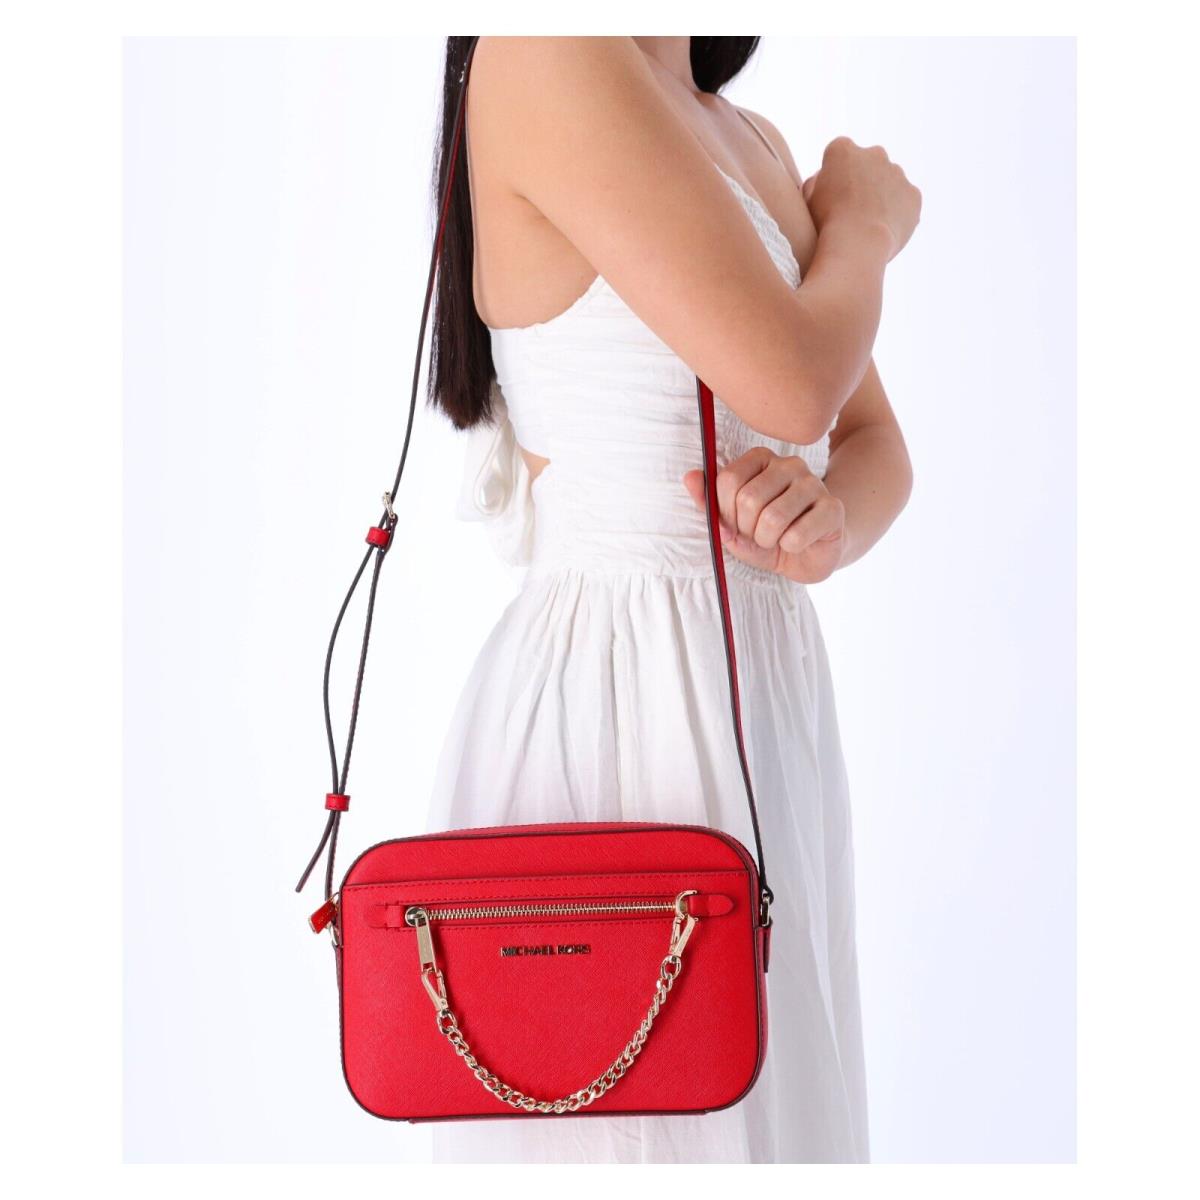 Michael Kors Jet Set Large East West Zip Chain Crossbody Bag Bright Red Leather